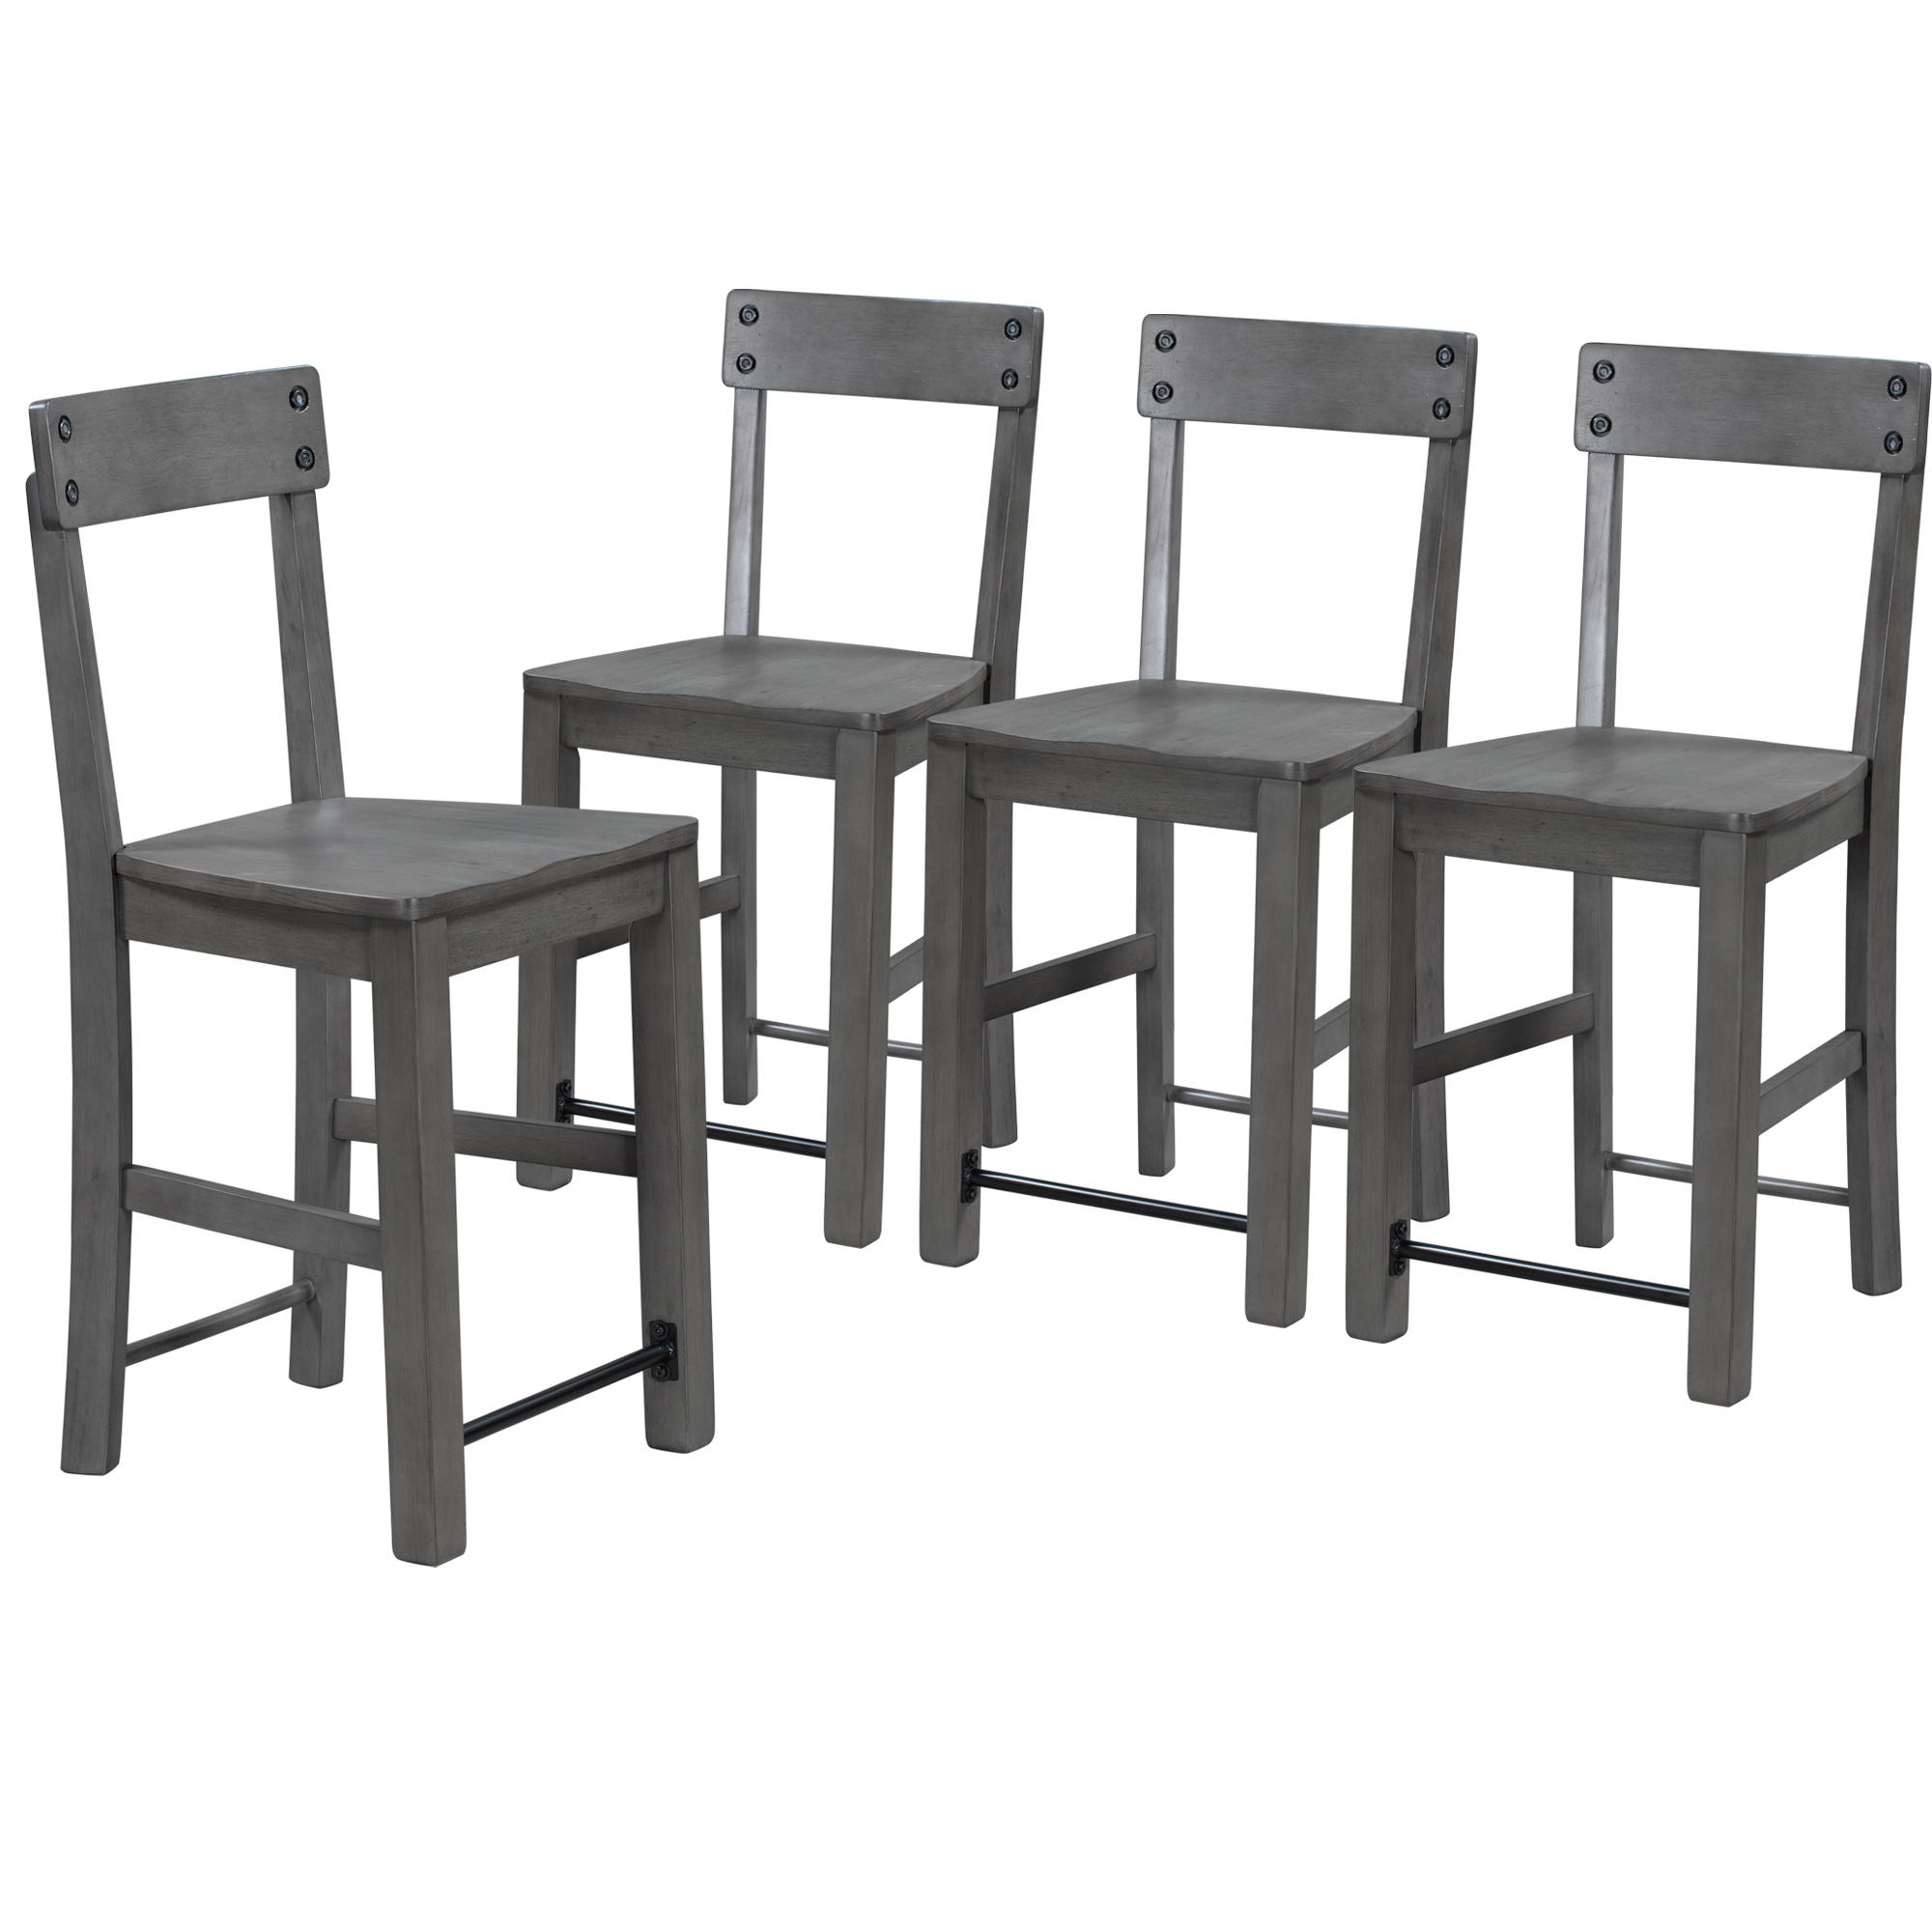 TREXM Counter Height Dining Chairs Industrial Style Wood Dining Room Chairs with Ergonomic Design, Set of 4 (Gray)